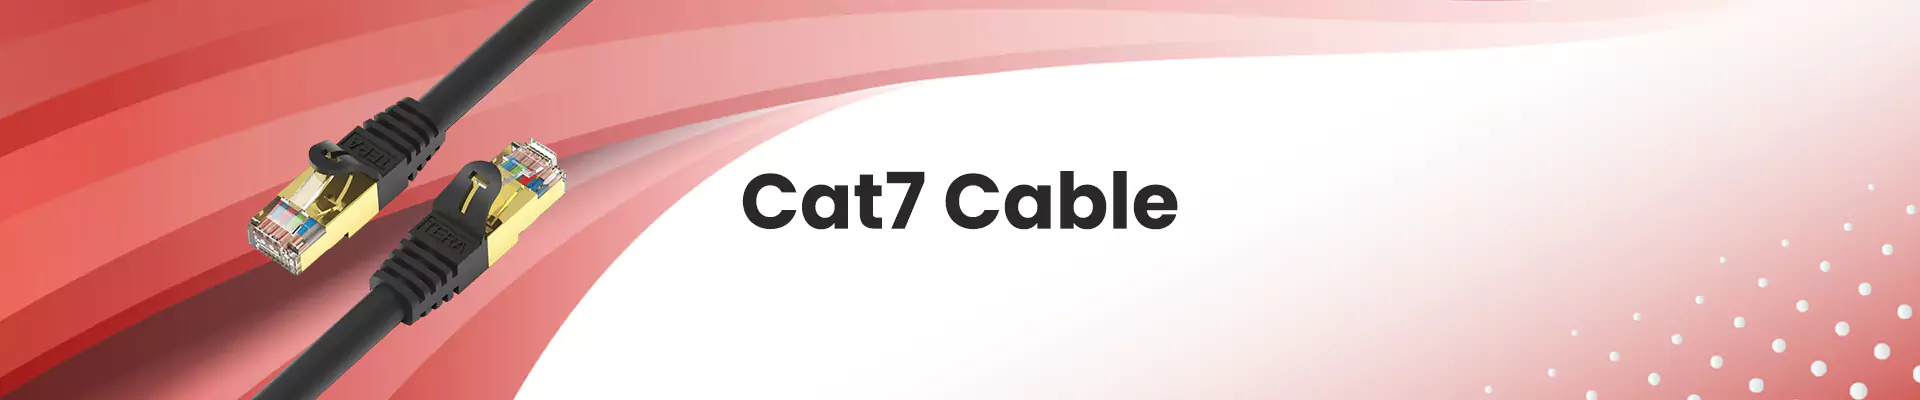 Cat7 Cable 